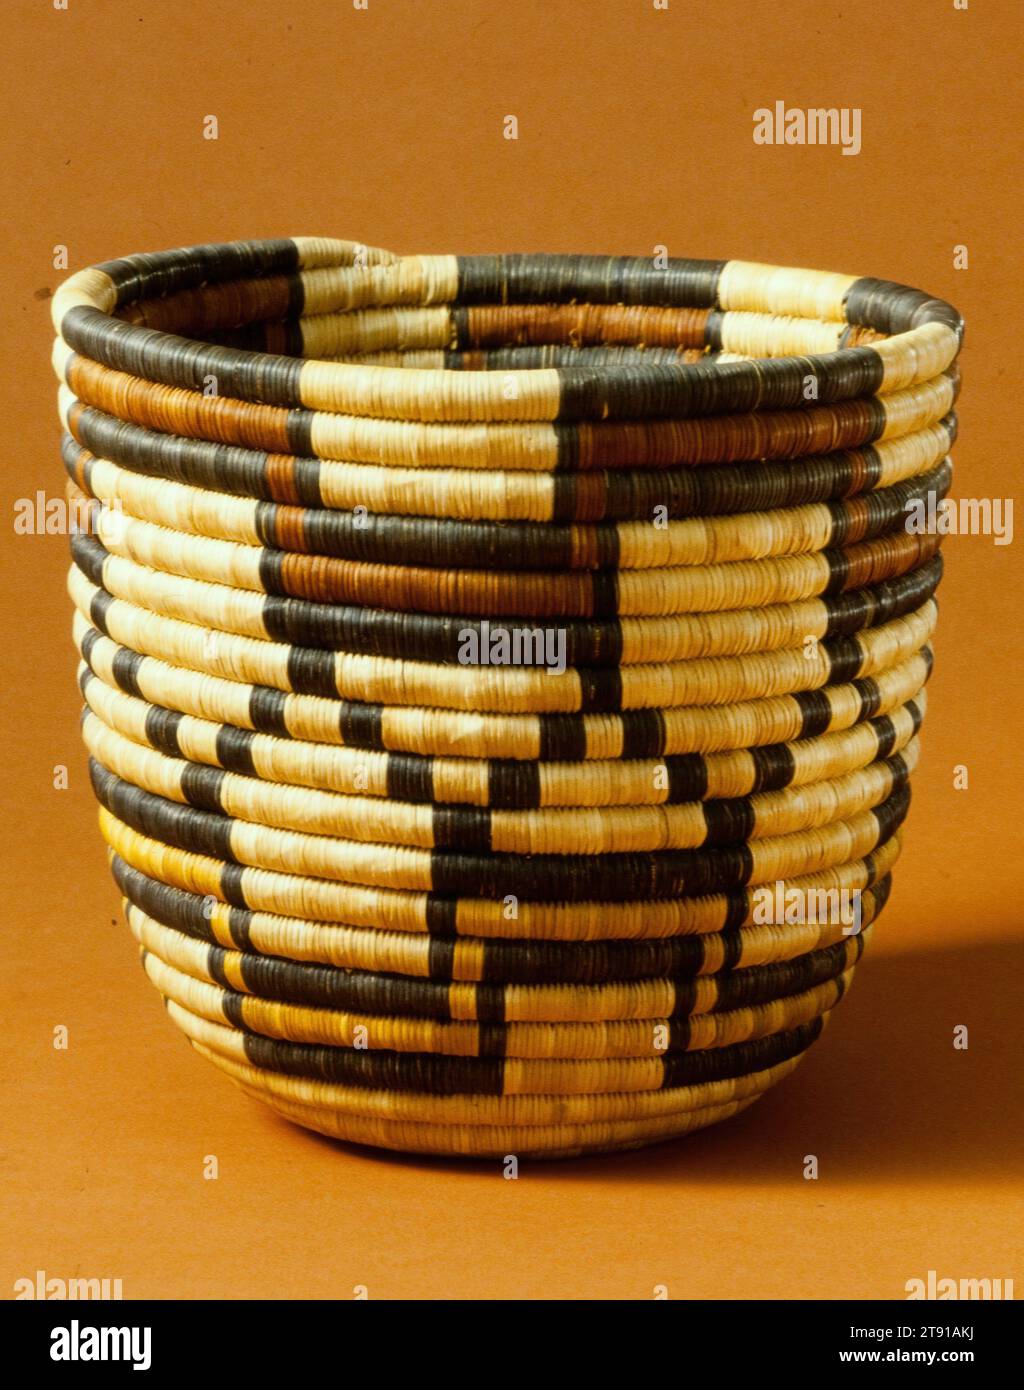 Basket, c. 1930, 9 3/8 x 9 3/4 x 9 3/4 in. (23.81 x 24.77 x 24.77 cm), Coiled grass, yucca fibers, United States, 20th century, The exact history of the development of Hòpituh Shi-nu-mu basketmaking remains vague, however modern artists have come to be considered one of the foremost basketmaking groups in North America. Their baskets employ the technique of sewing slender yucca splints wound tightly and stitched so closely that the stitches appear to be interlocked. Baskets were often created for sale Stock Photo